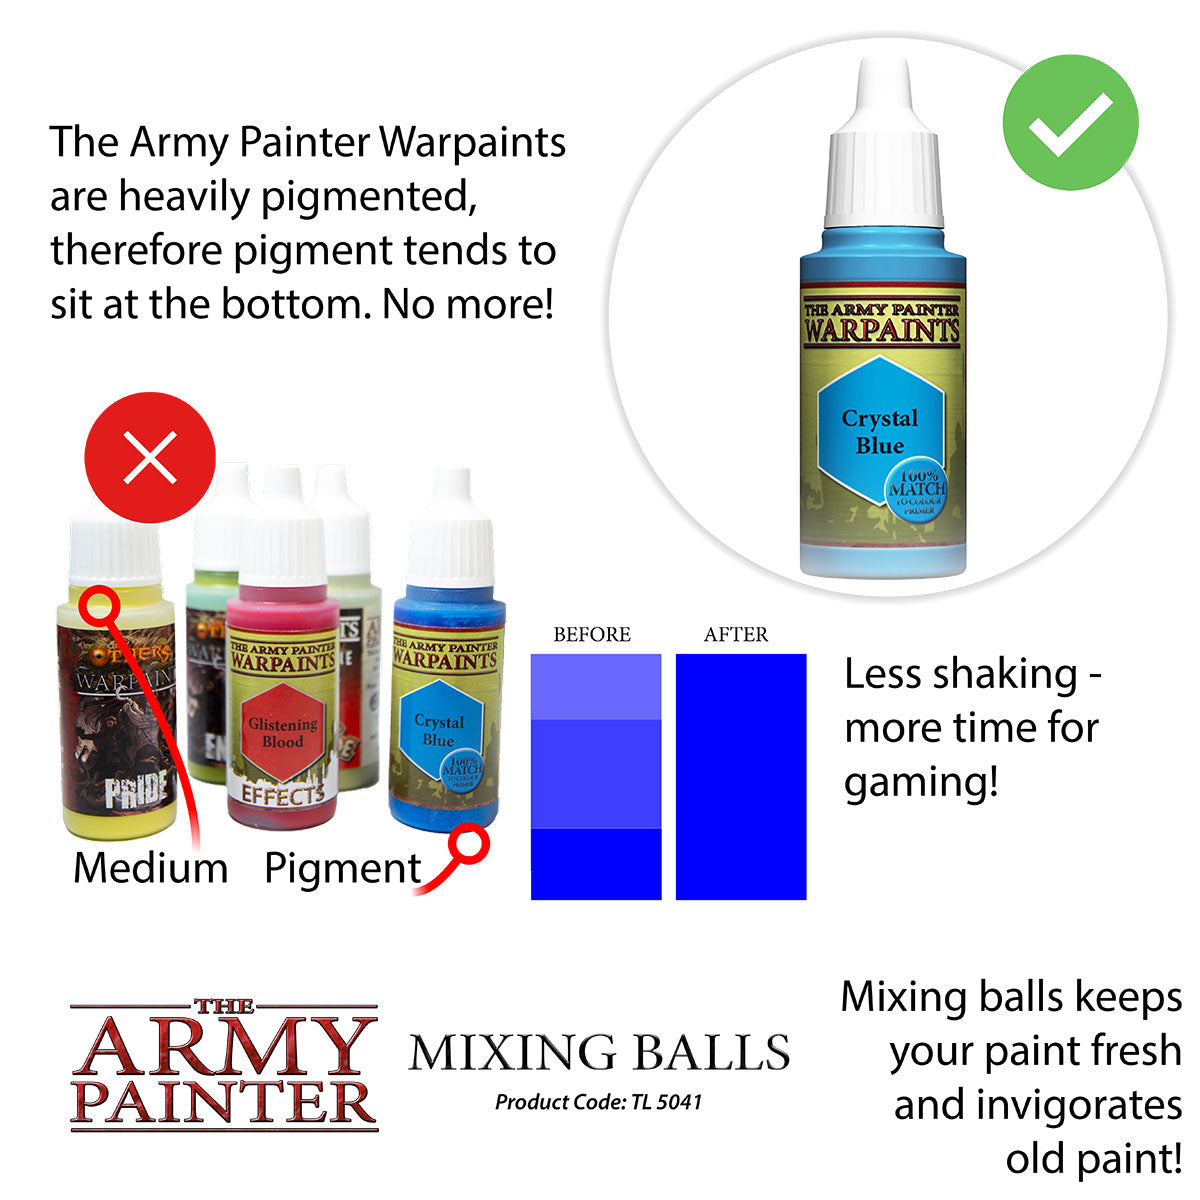 Balls for mixing paint. I have a bunch of these small magnet balls from a  while ago and was wondering if they would work for using in paint pots for  mixing the